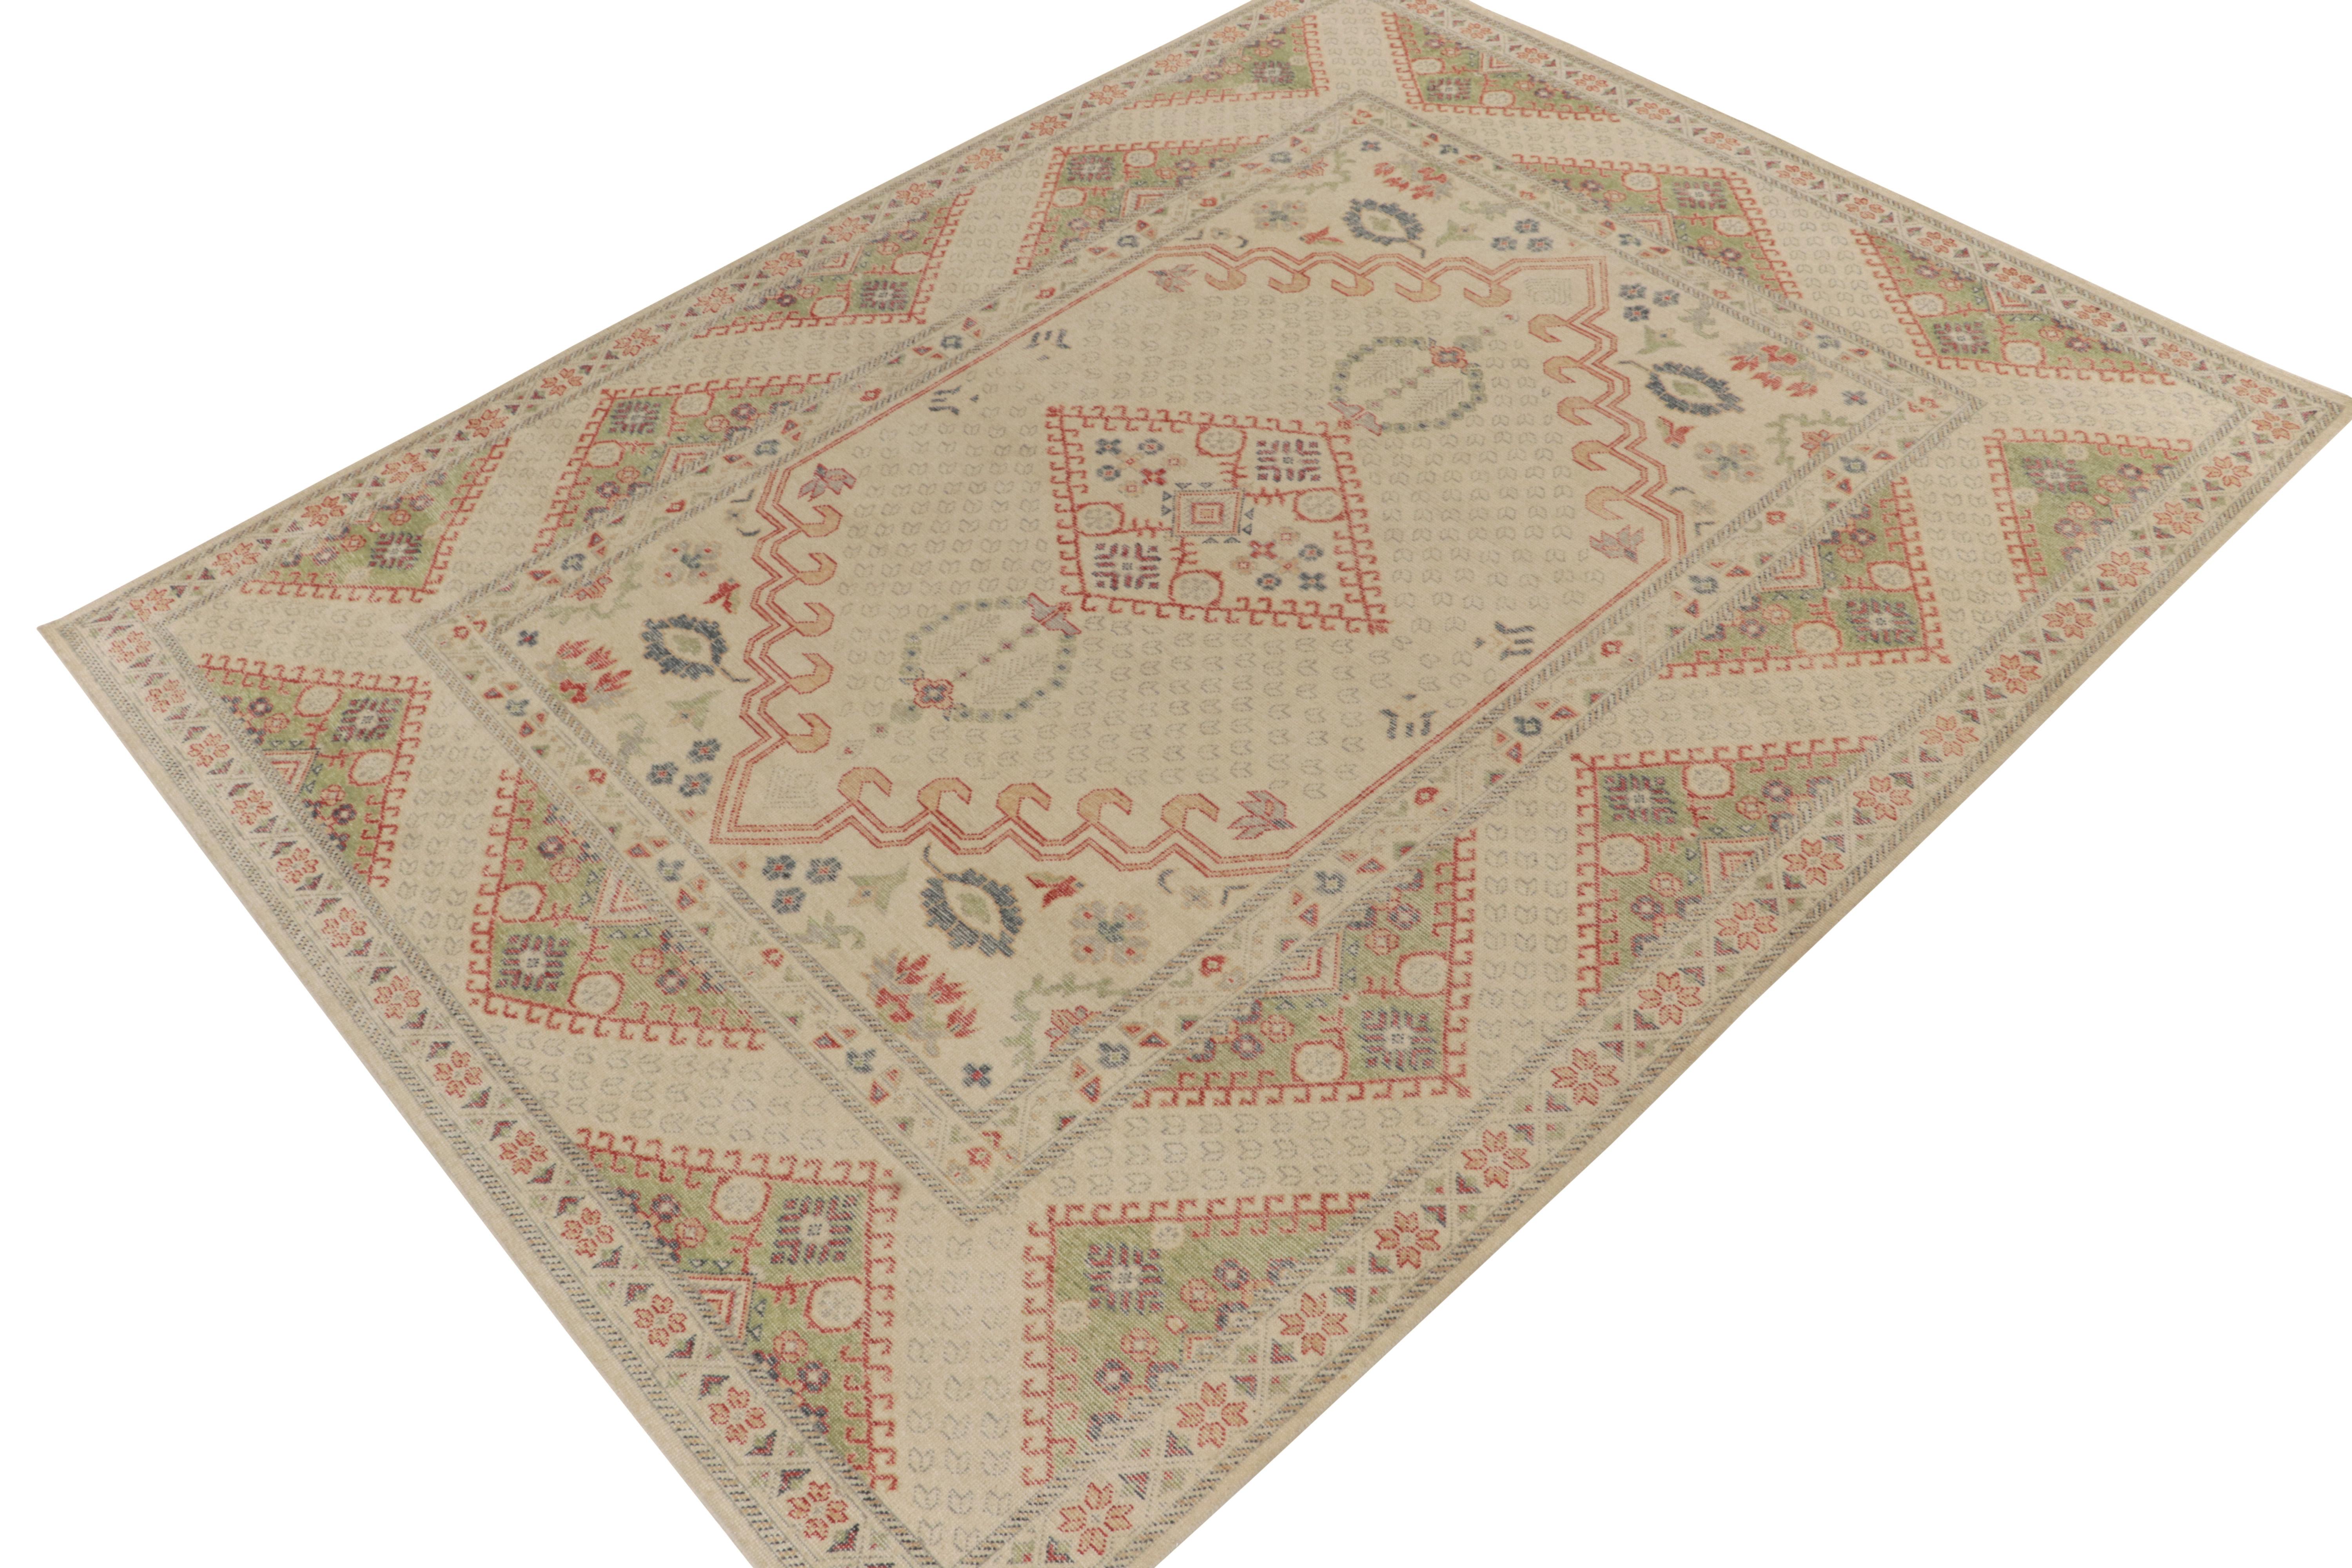 From Rug & Kilim’s Homage Collection, a 9x12 hand-knotted wool rug inspired by turn-of-the-century antique Ghiordes rugs. 

On the Design: The vision enjoys a sophisticated play of regal geometry in greige and green, with red accents especially